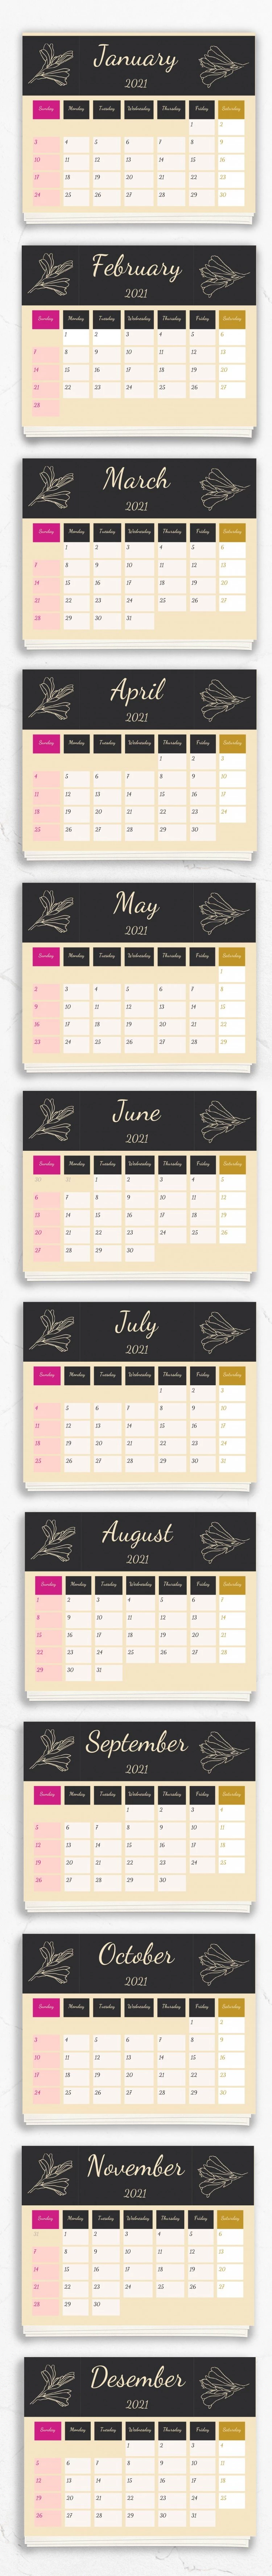 Adorable calendrier imprimable 2021 - free Google Docs Template - 10061513